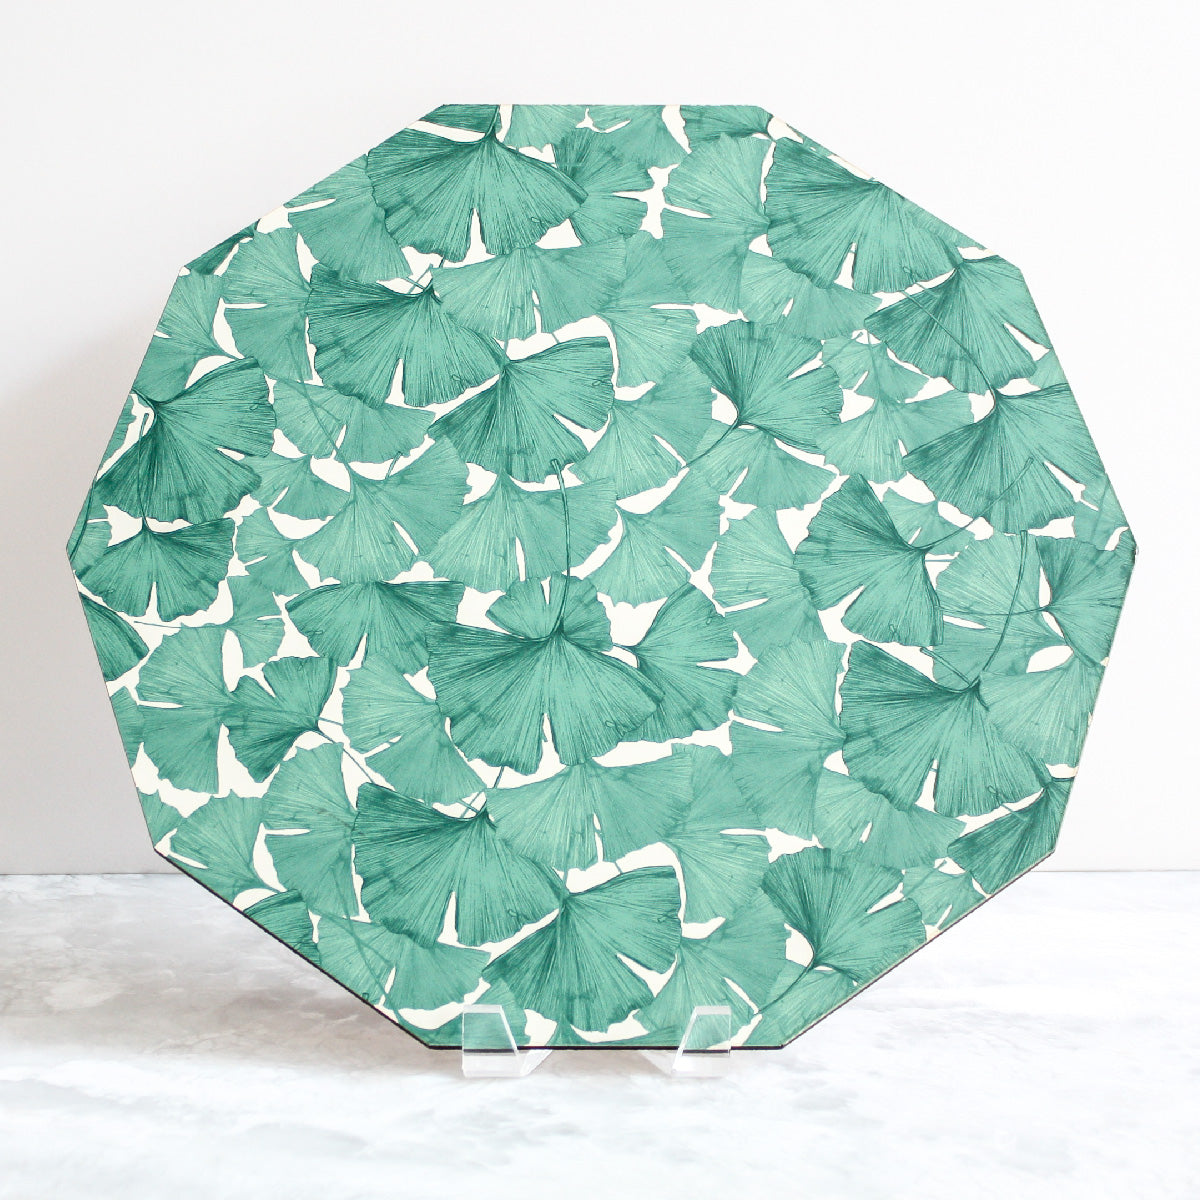 Gingko Placemat in green and white made of wood and cork by Tisch New York